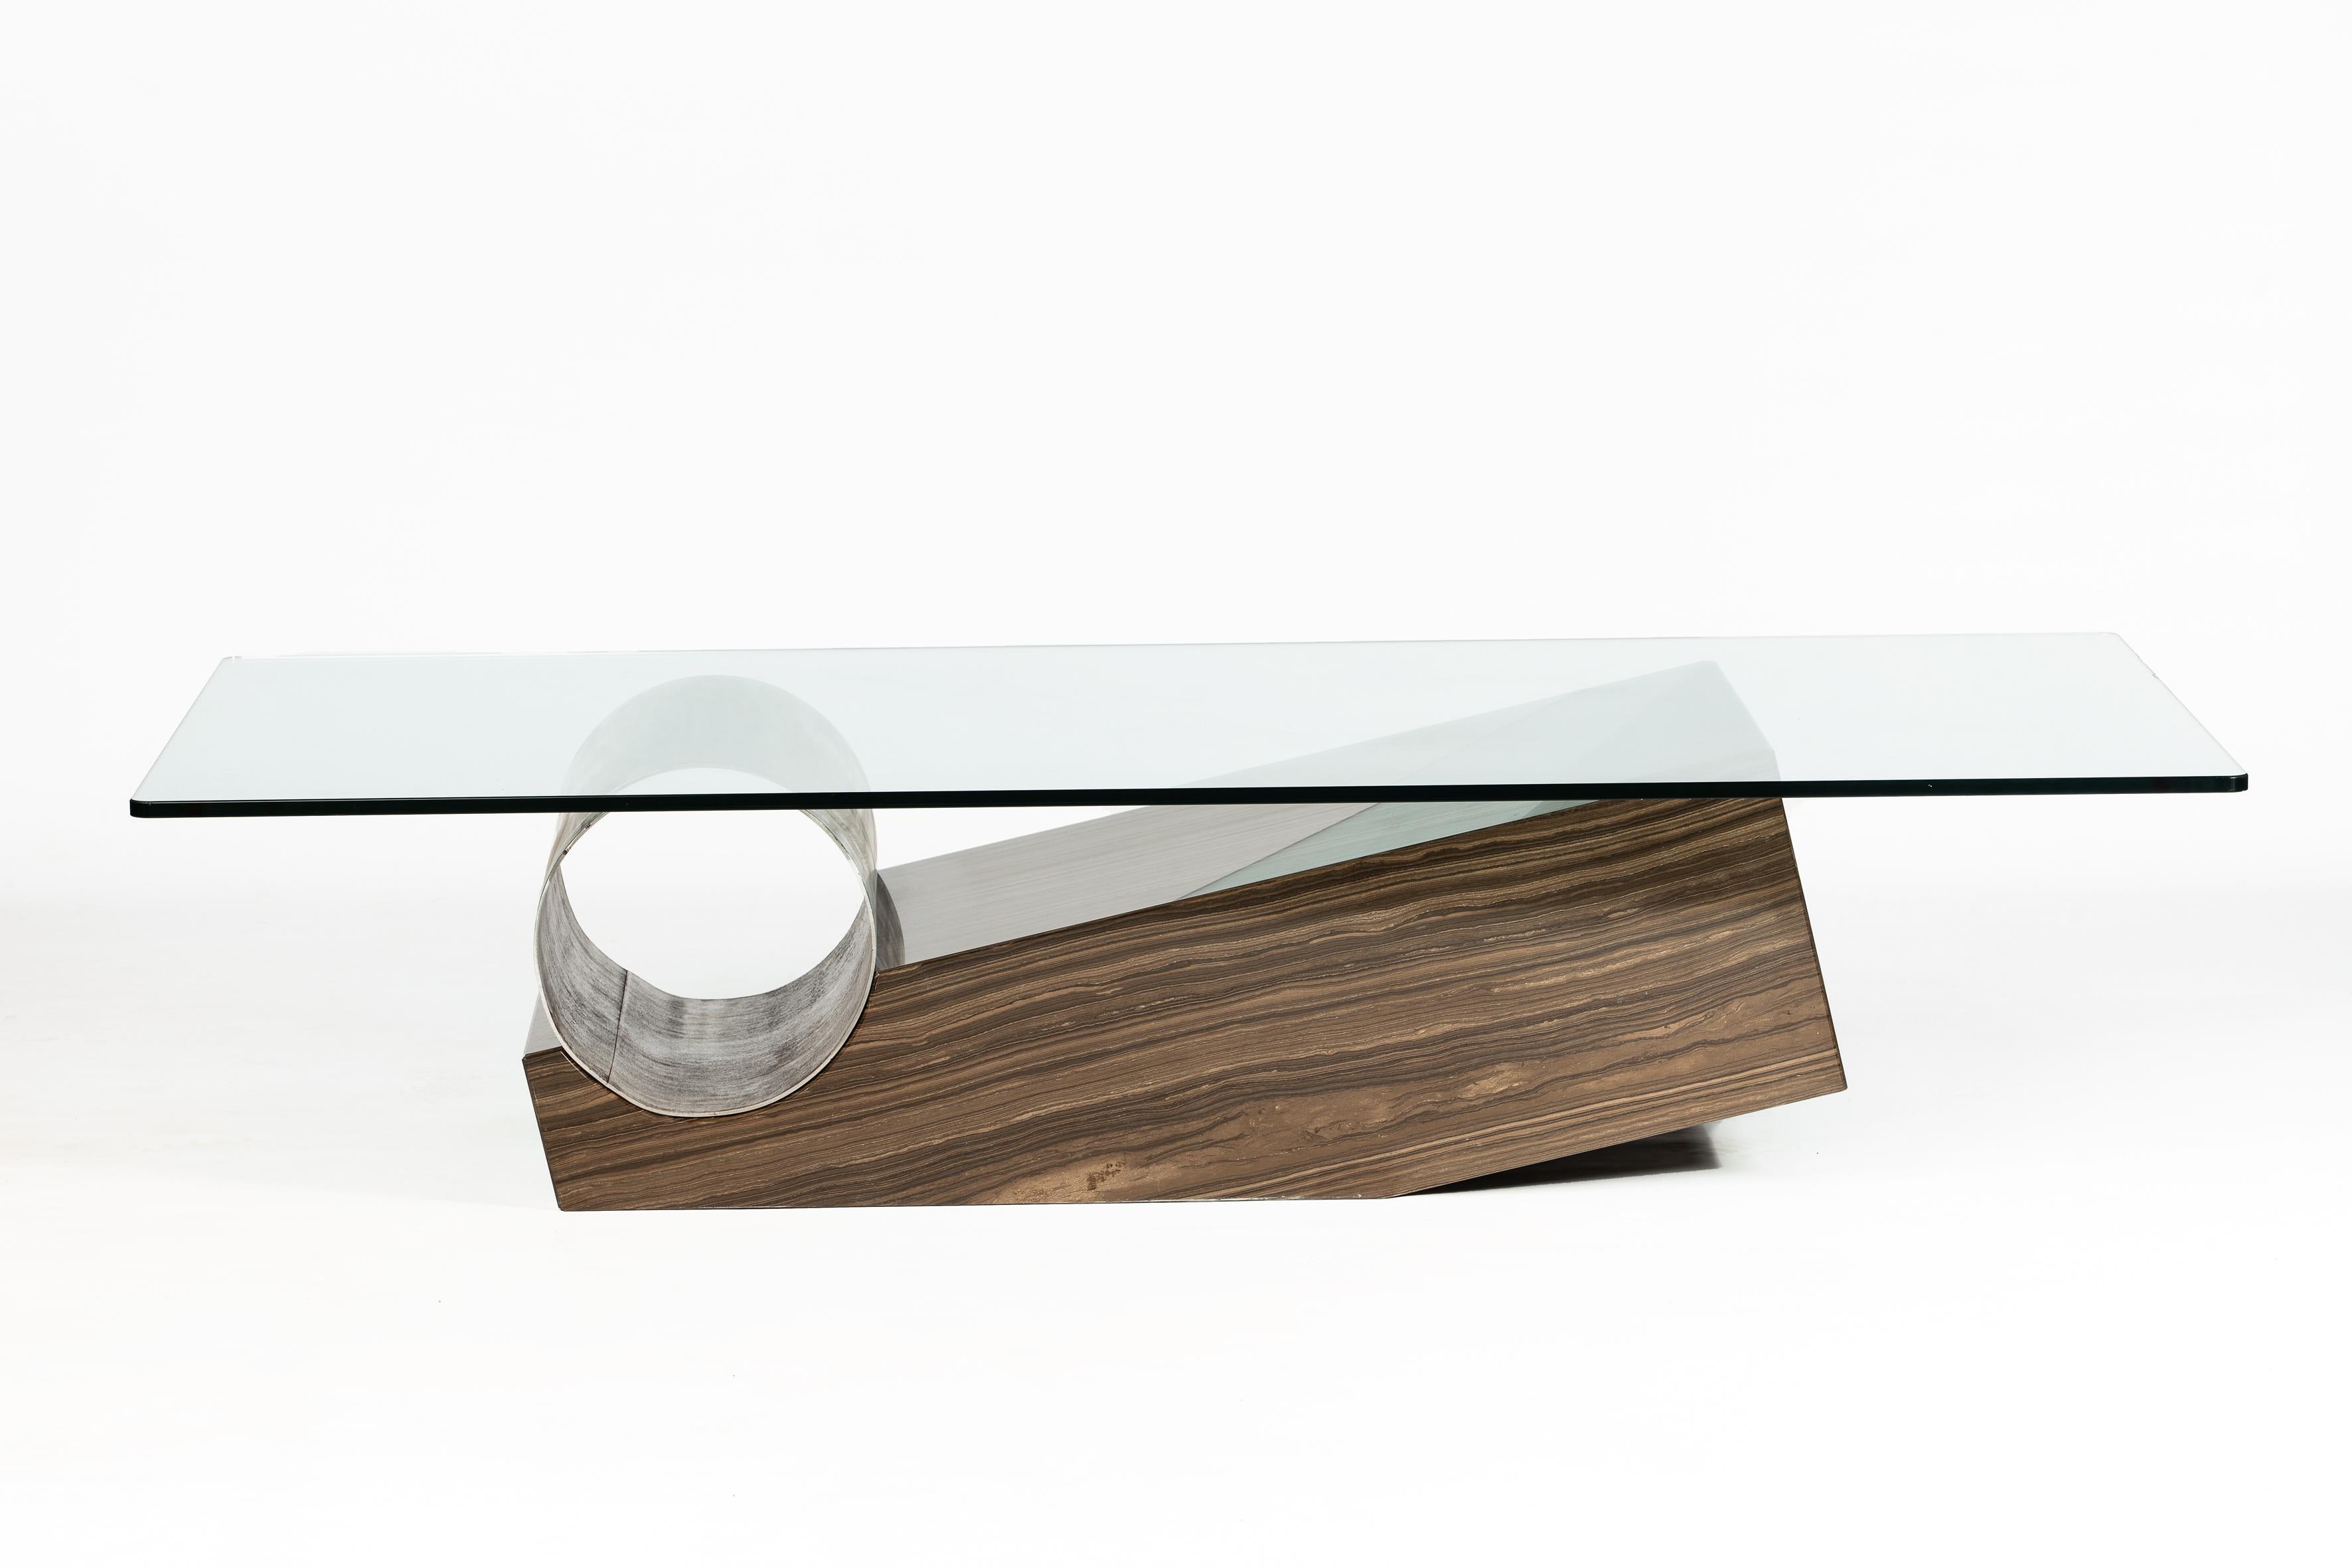 Medes Coffee is a designer coffee table with a combination of three materials: Wenge marble, devastated iron and glass. The combination of these three materials is the hallmark of designer Joaquín Moll, who seeks excellent conversations between